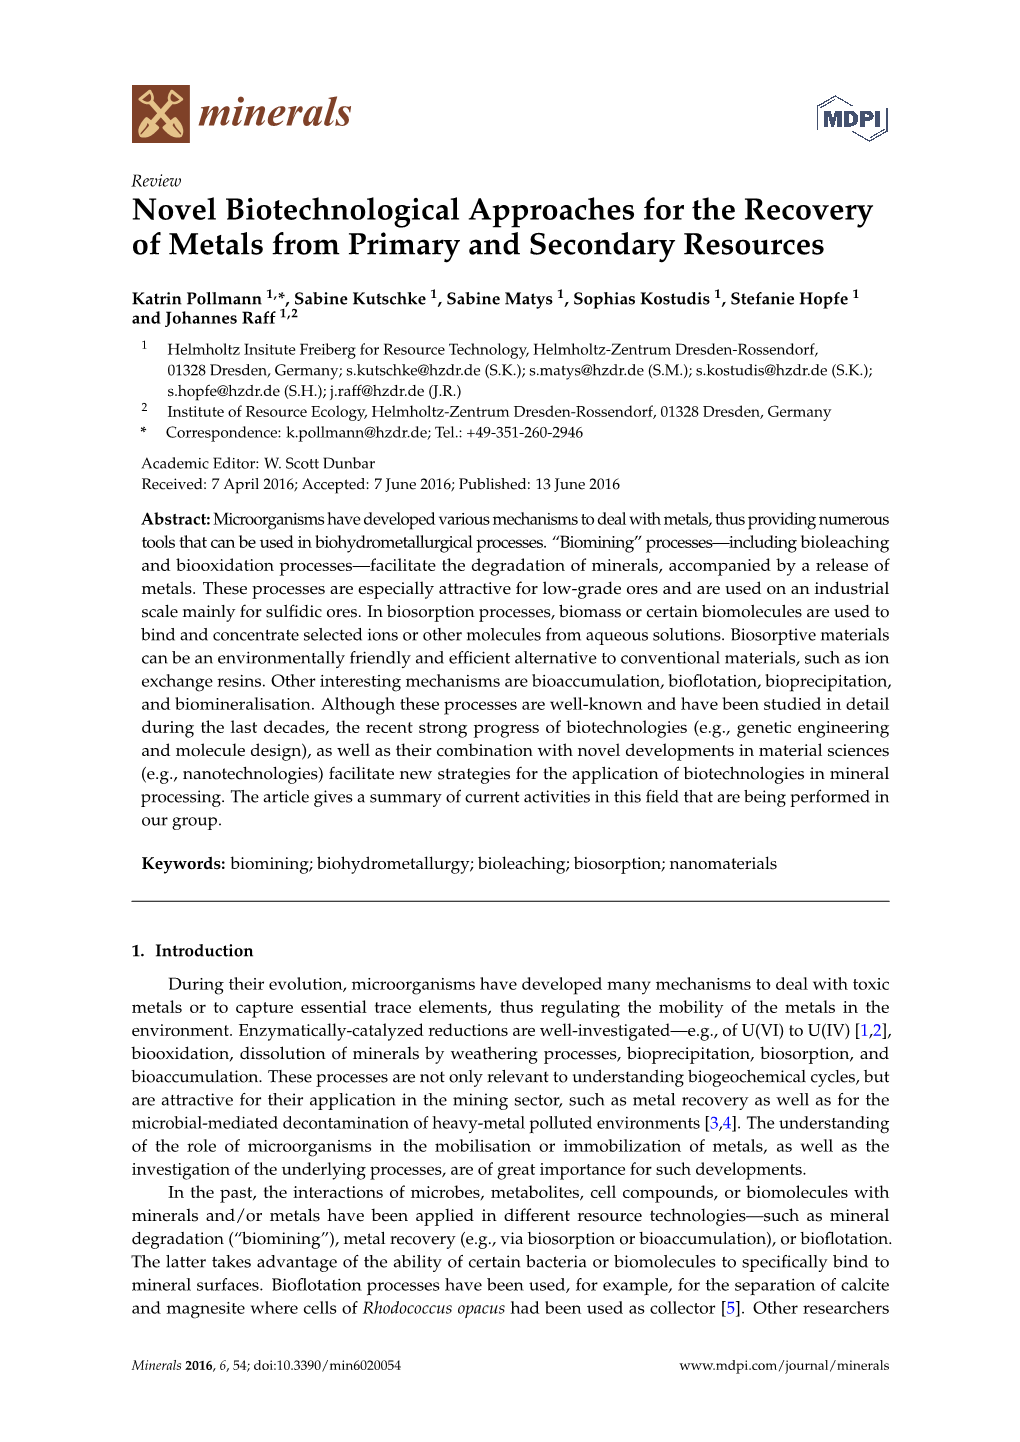 Novel Biotechnological Approaches for the Recovery of Metals from Primary and Secondary Resources